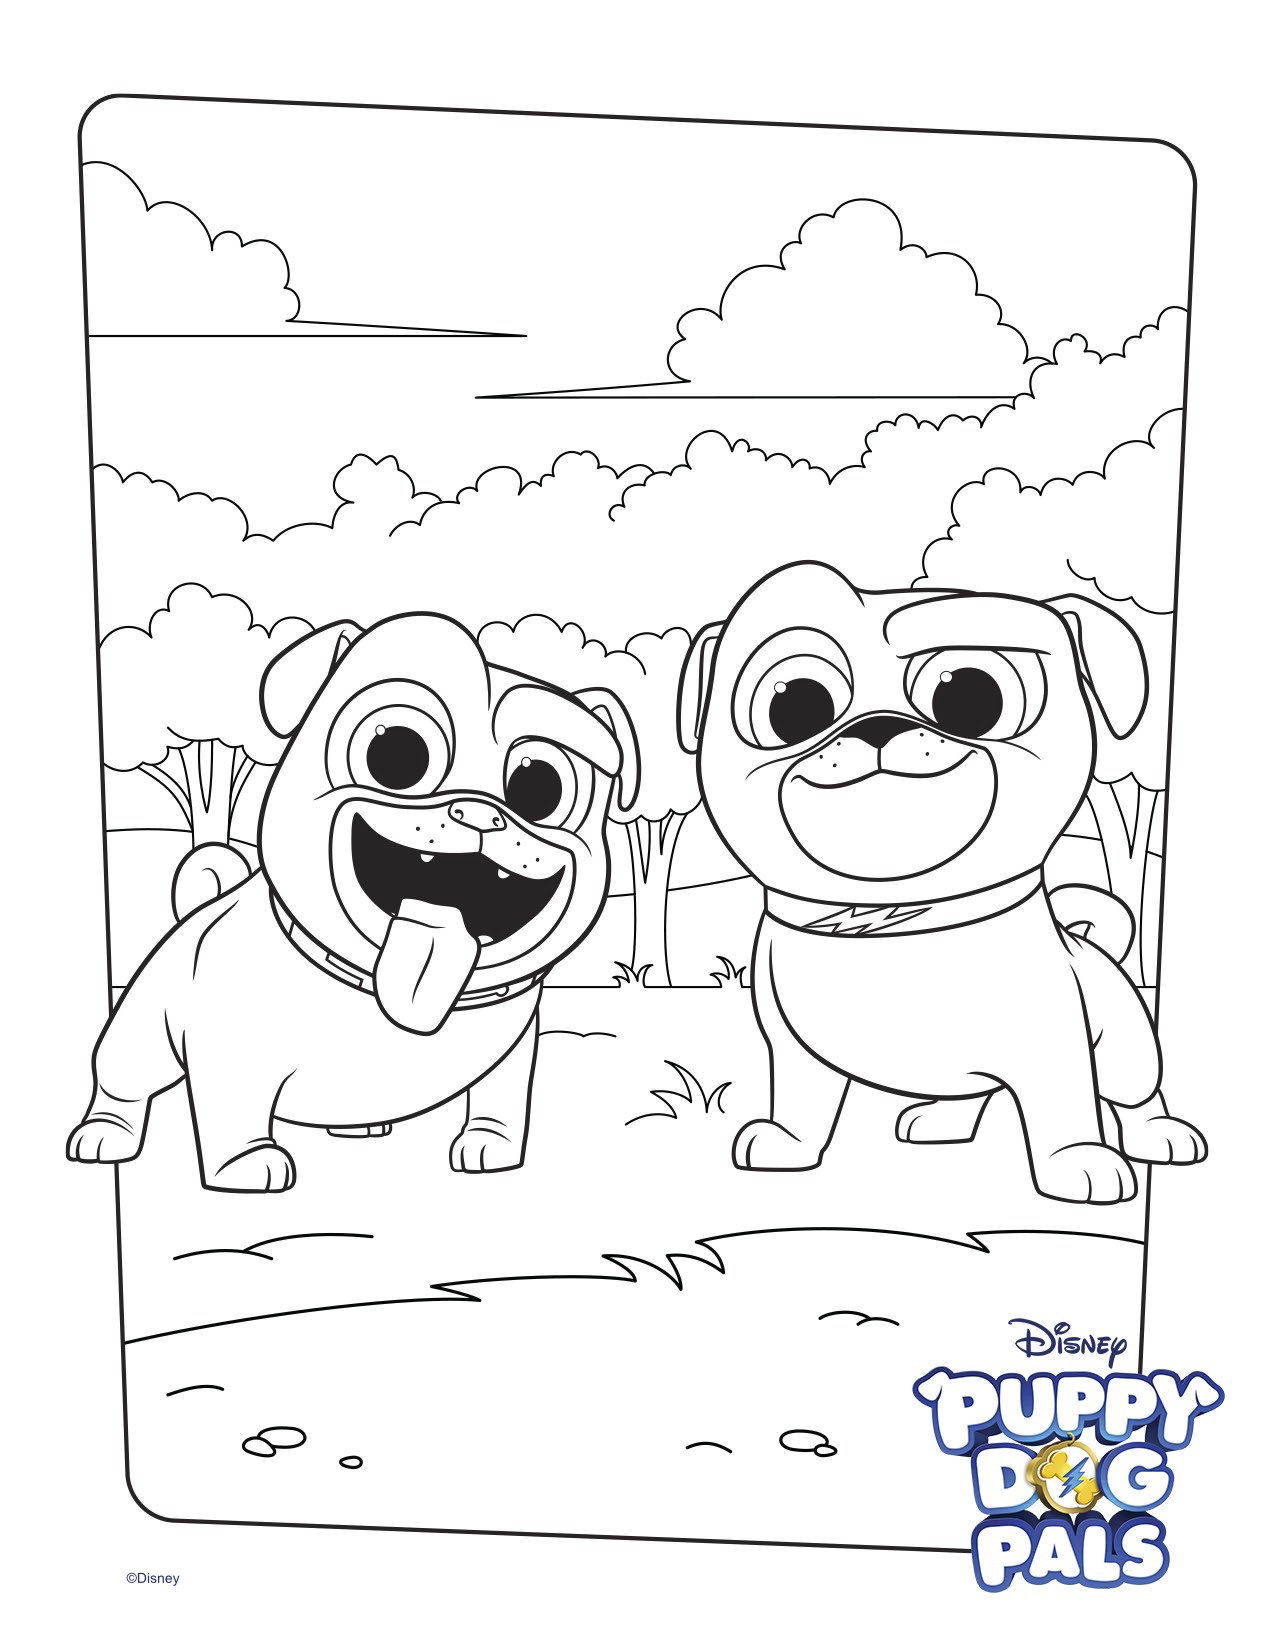 Disney.com Coloring Pages Bingo And Rolly Coloring Page Activity Disney Family